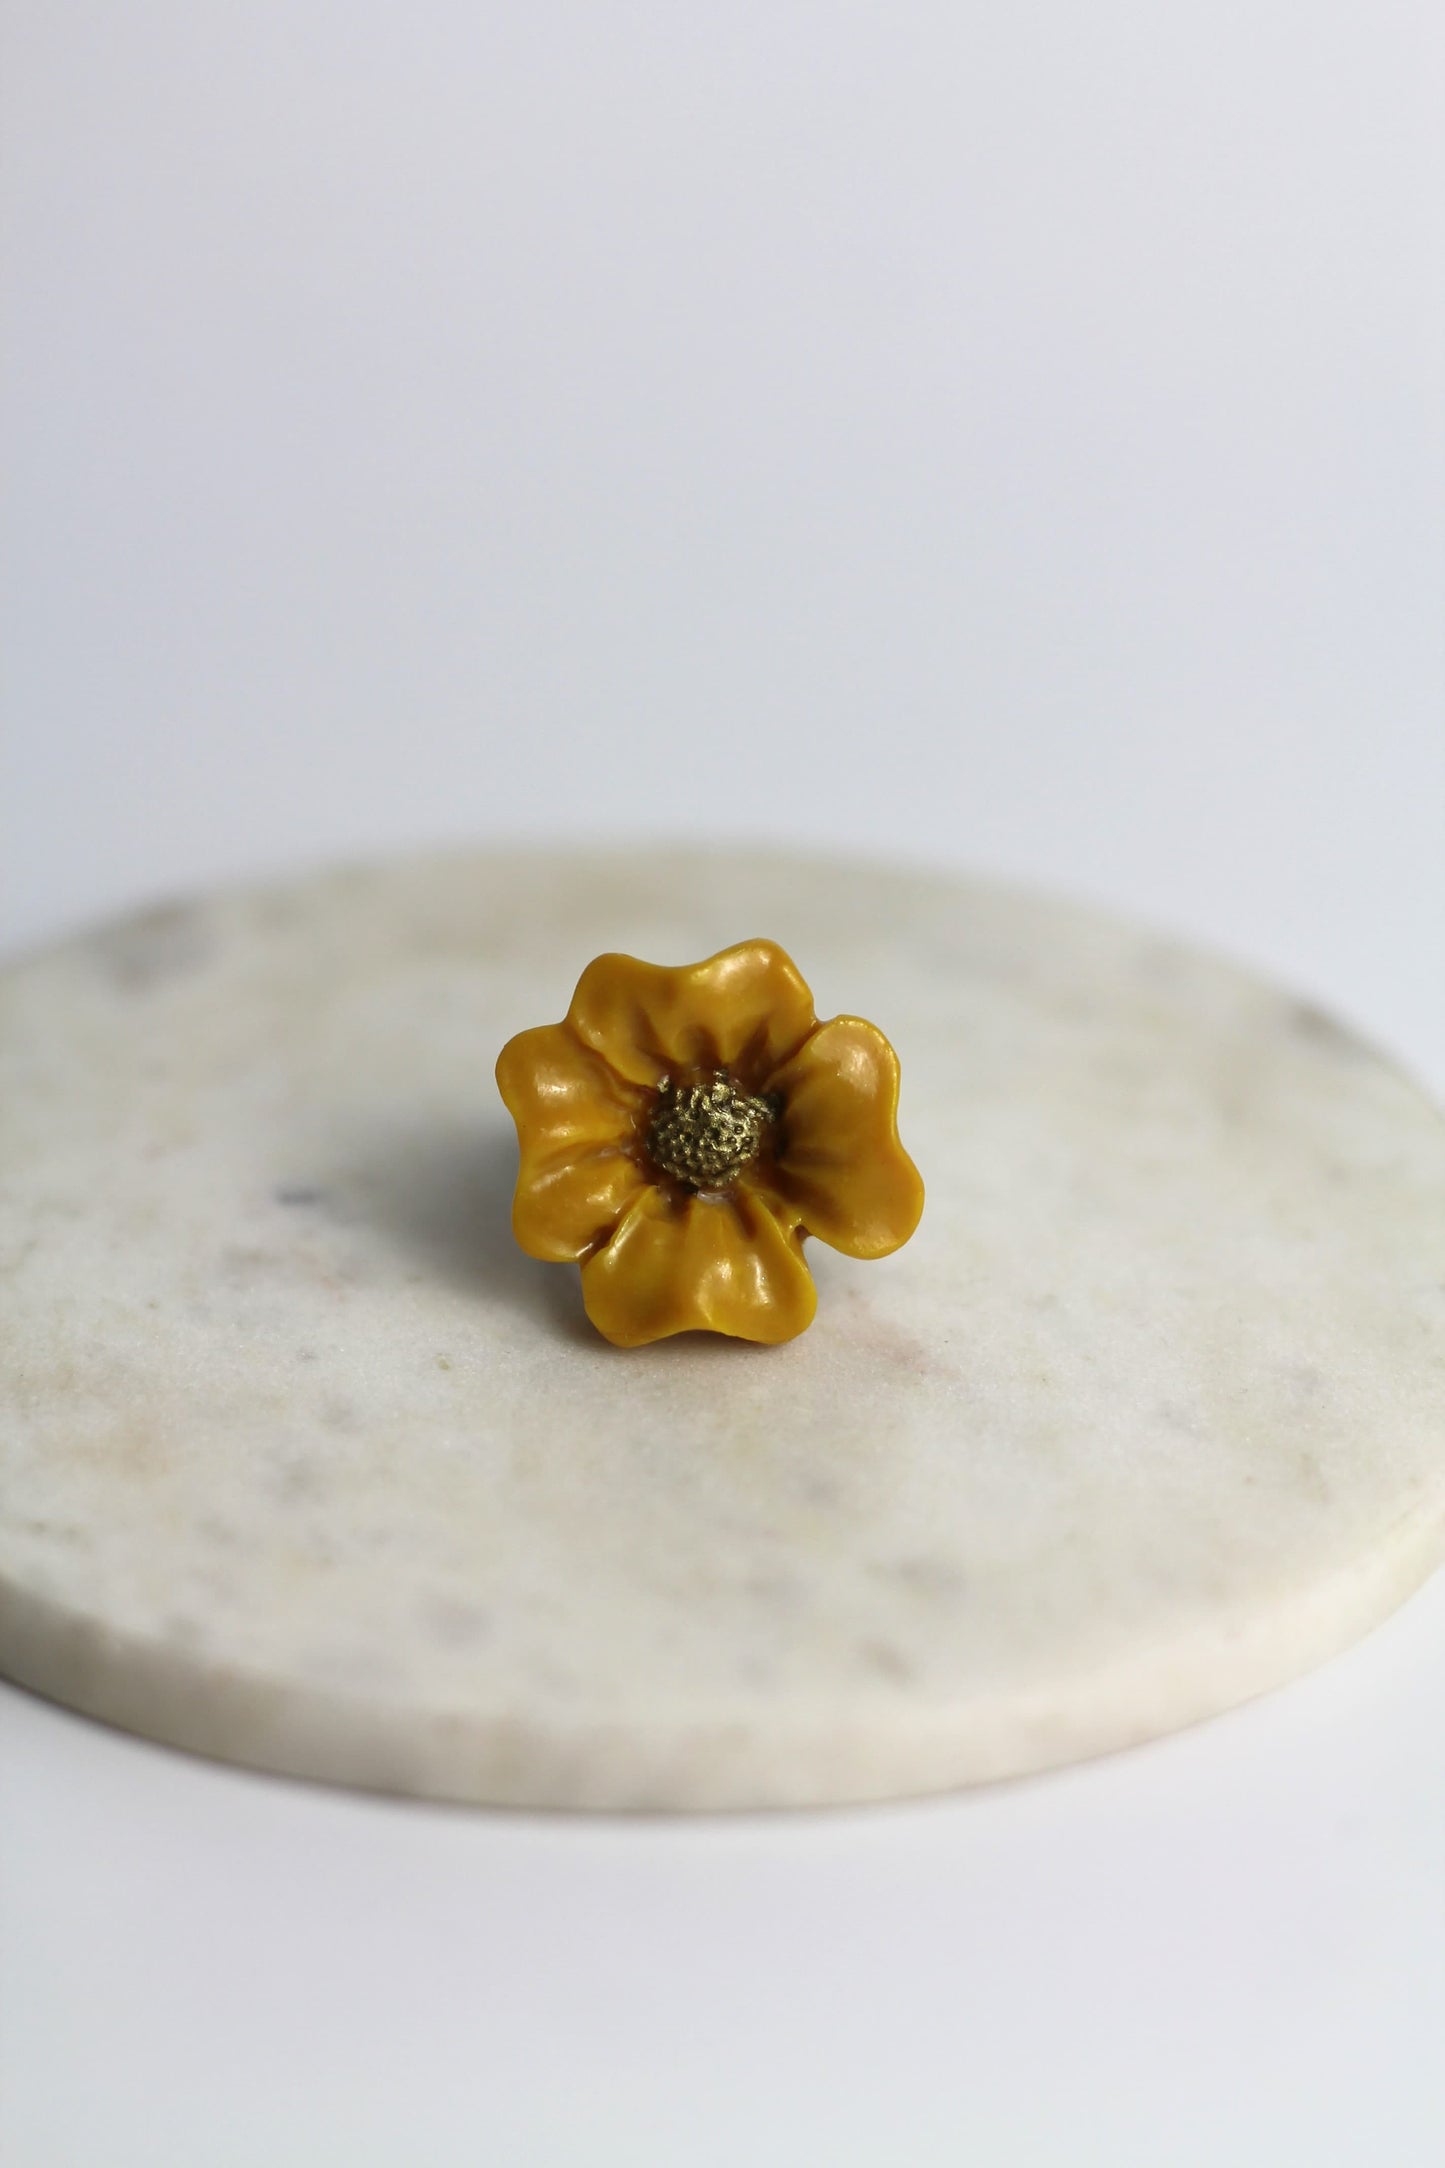 Flower Power ring - Fireweed - Yellow